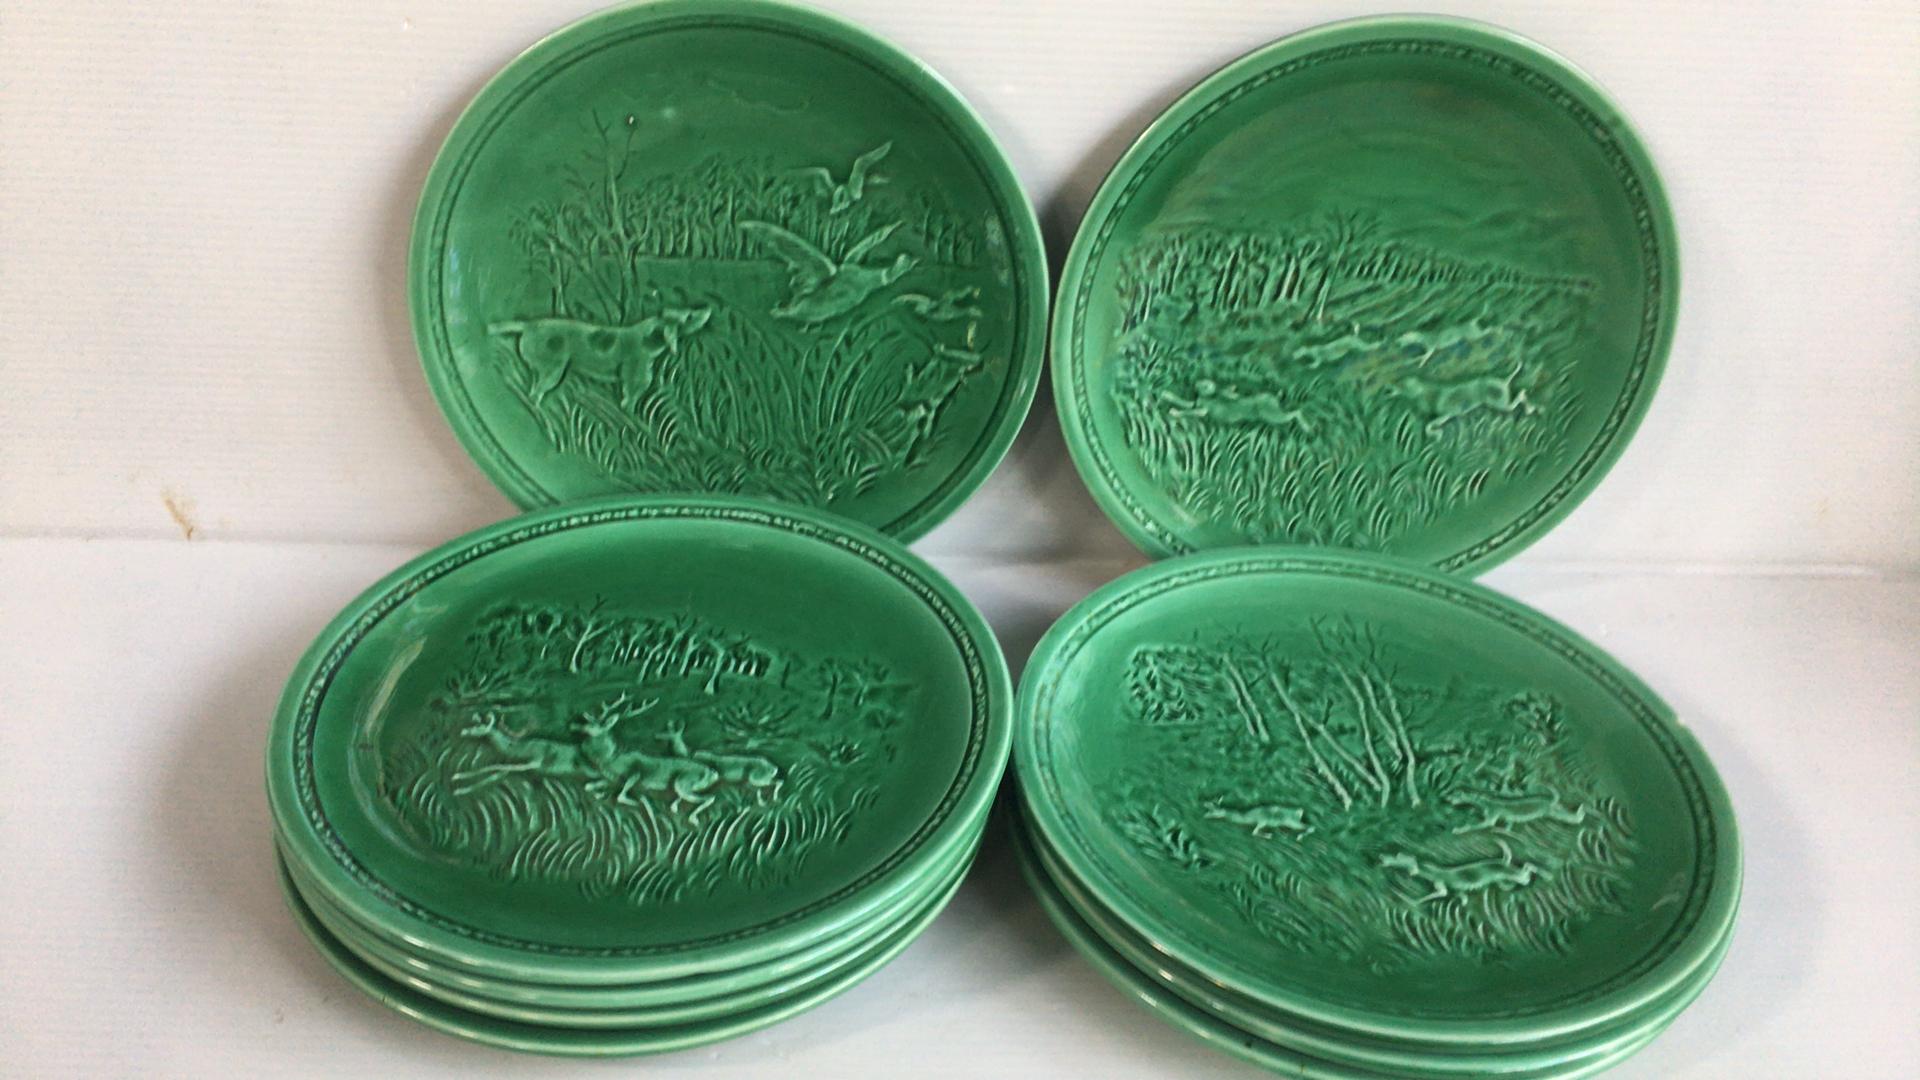 French green Majolica ducks and hunting dog plate signed Sarreguemines, circa 1920.
2 plates available.